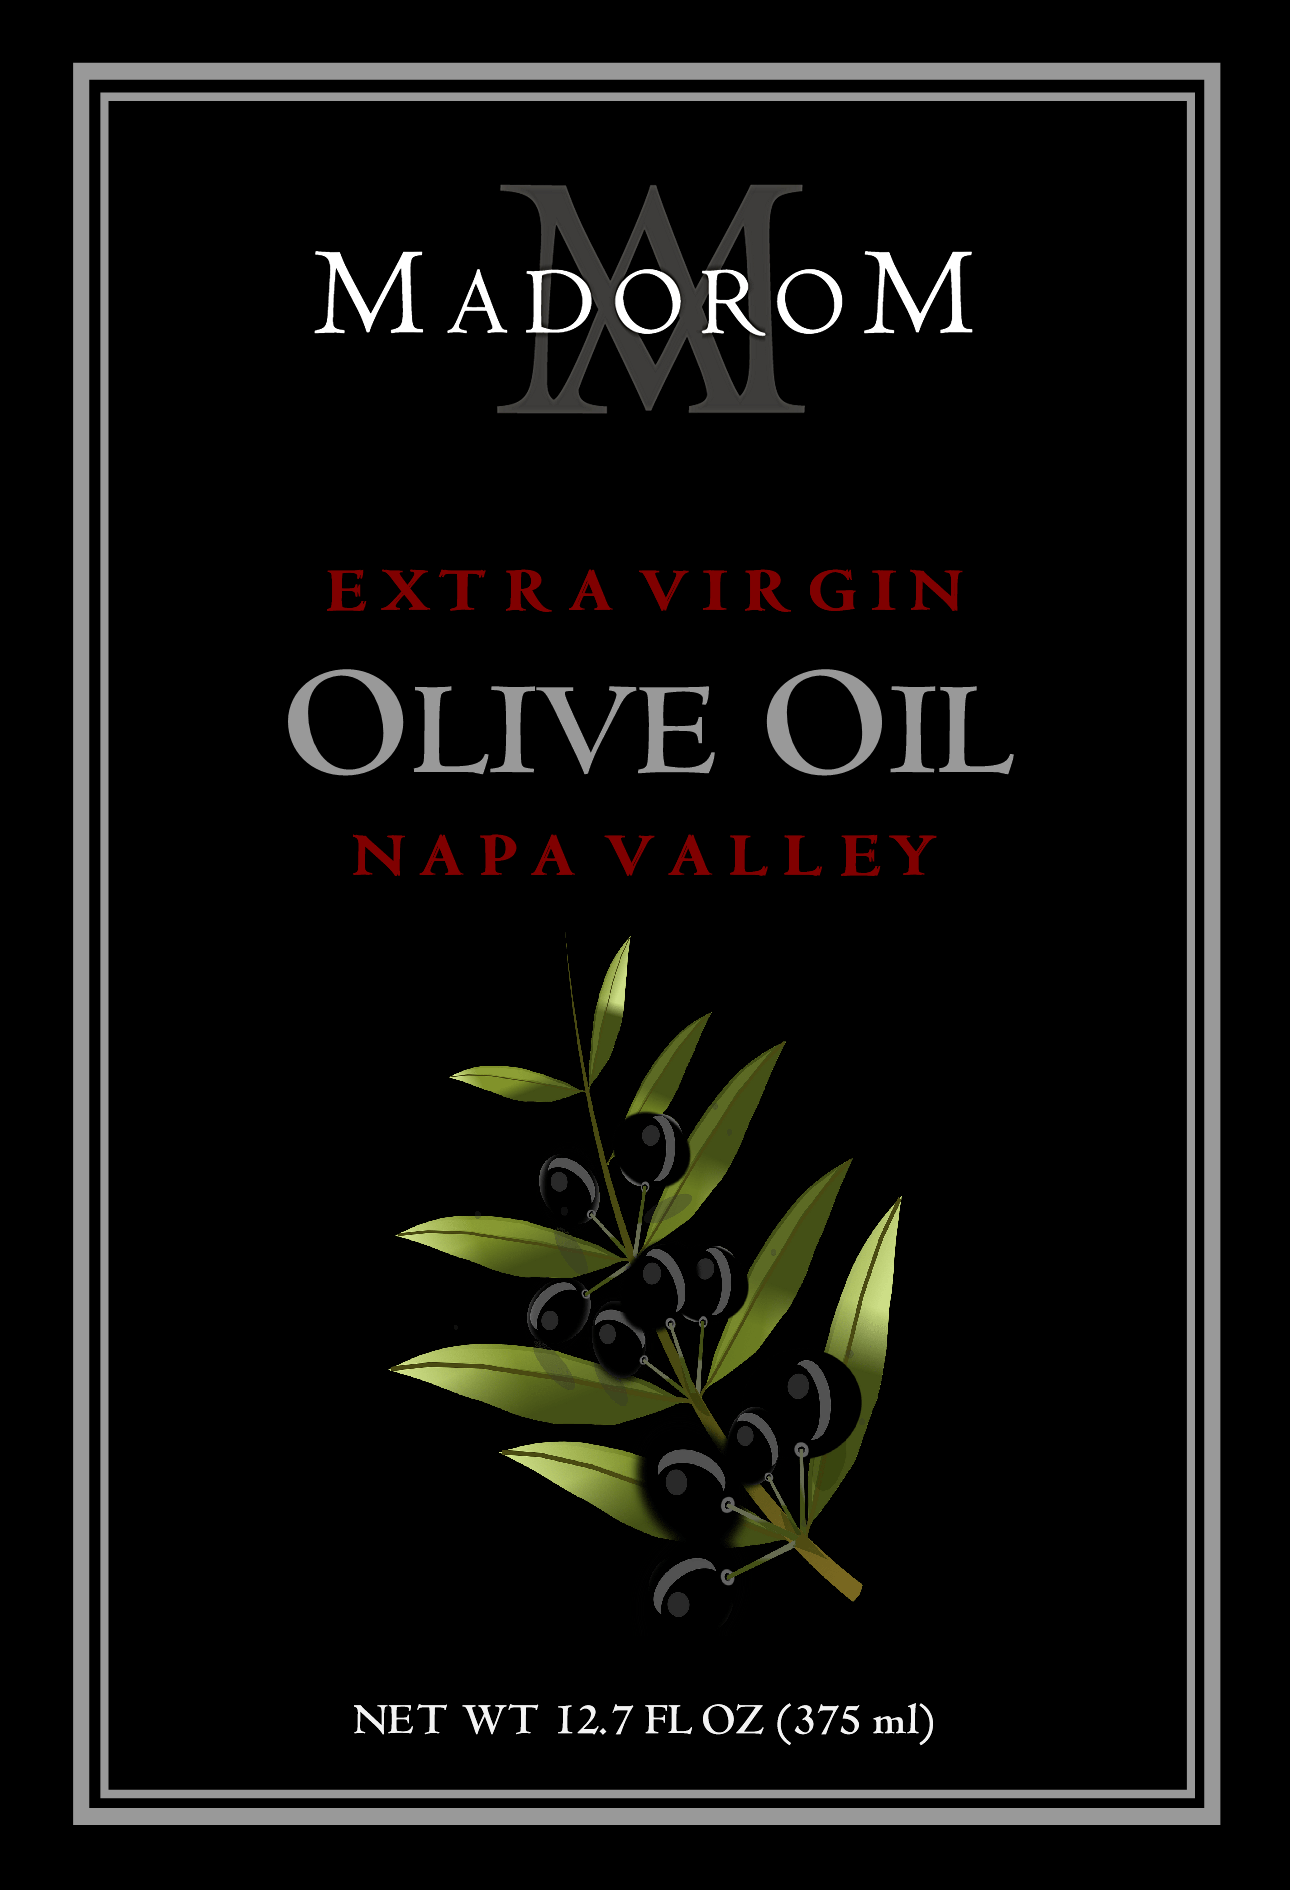 Product Image for MadoroM Olive Oil